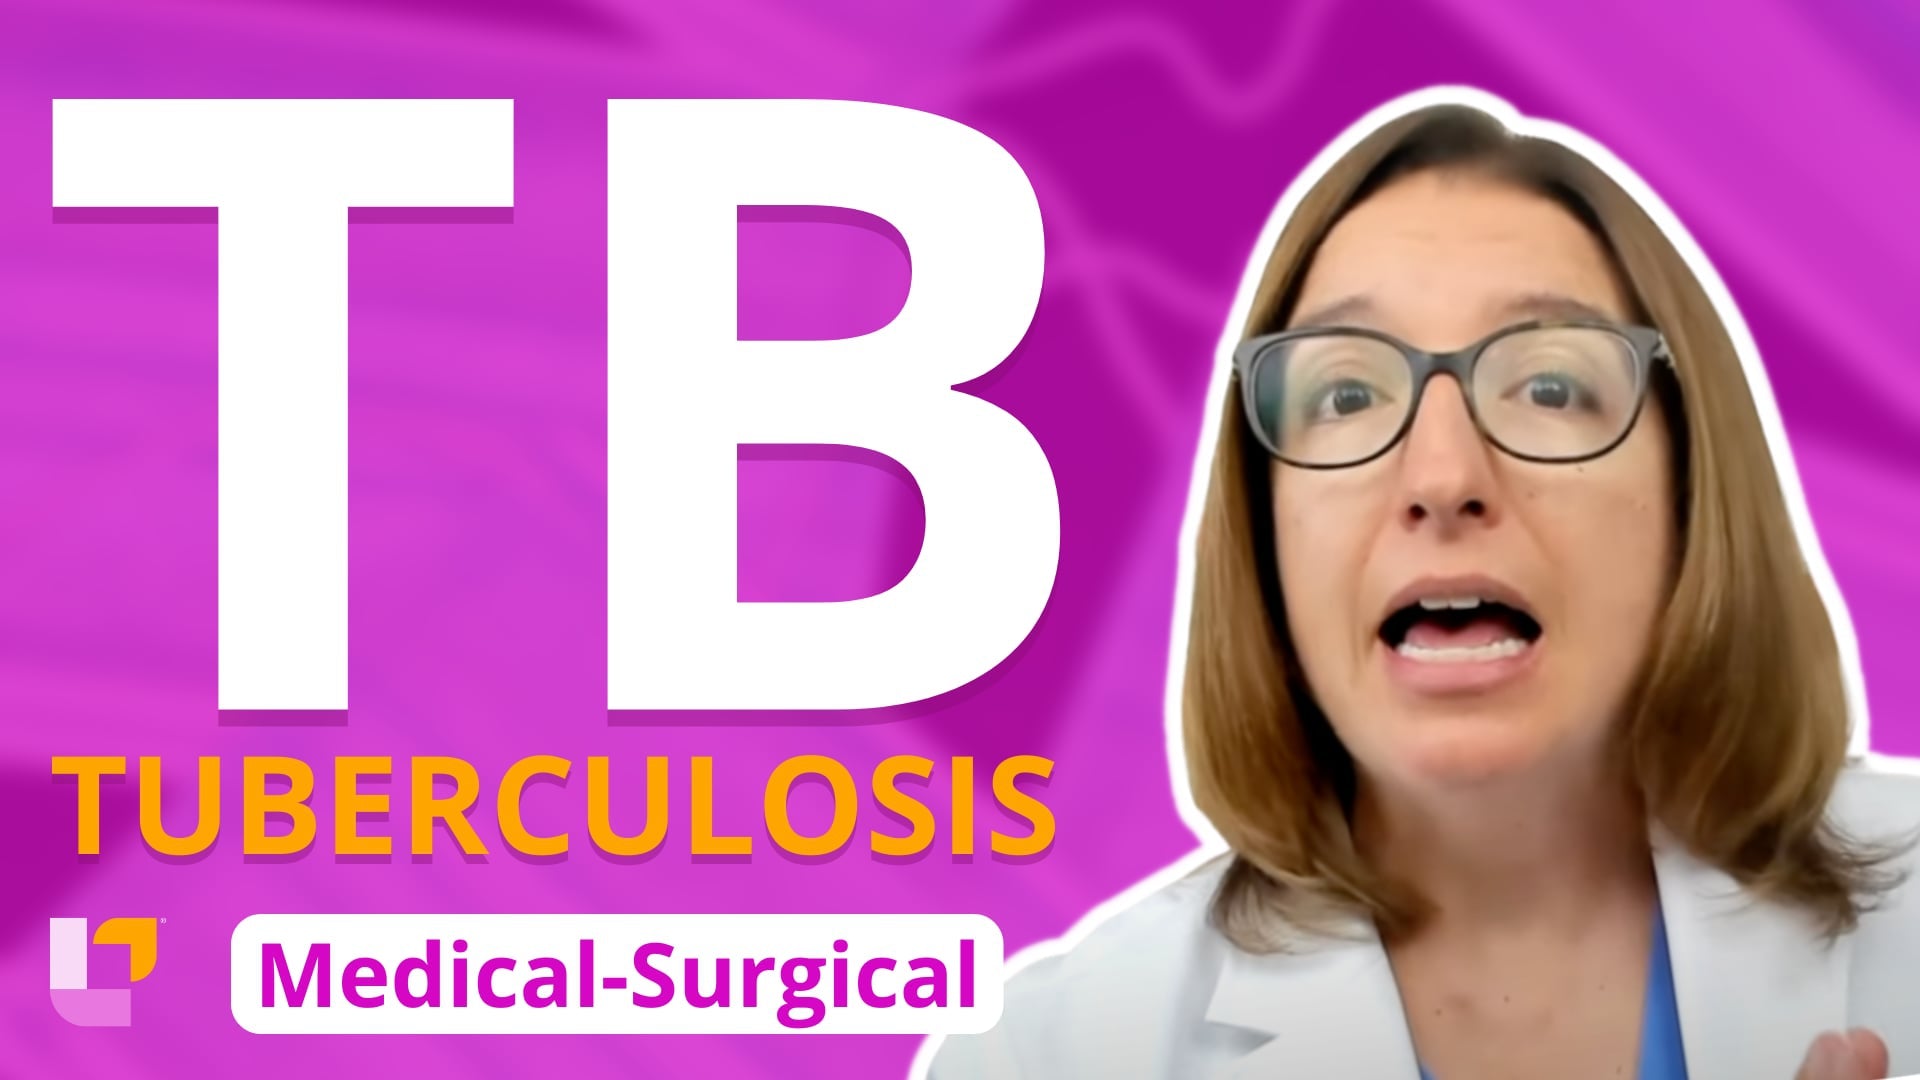 Med-Surg Respiratory System, part 9: Tuberculosis - LevelUpRN